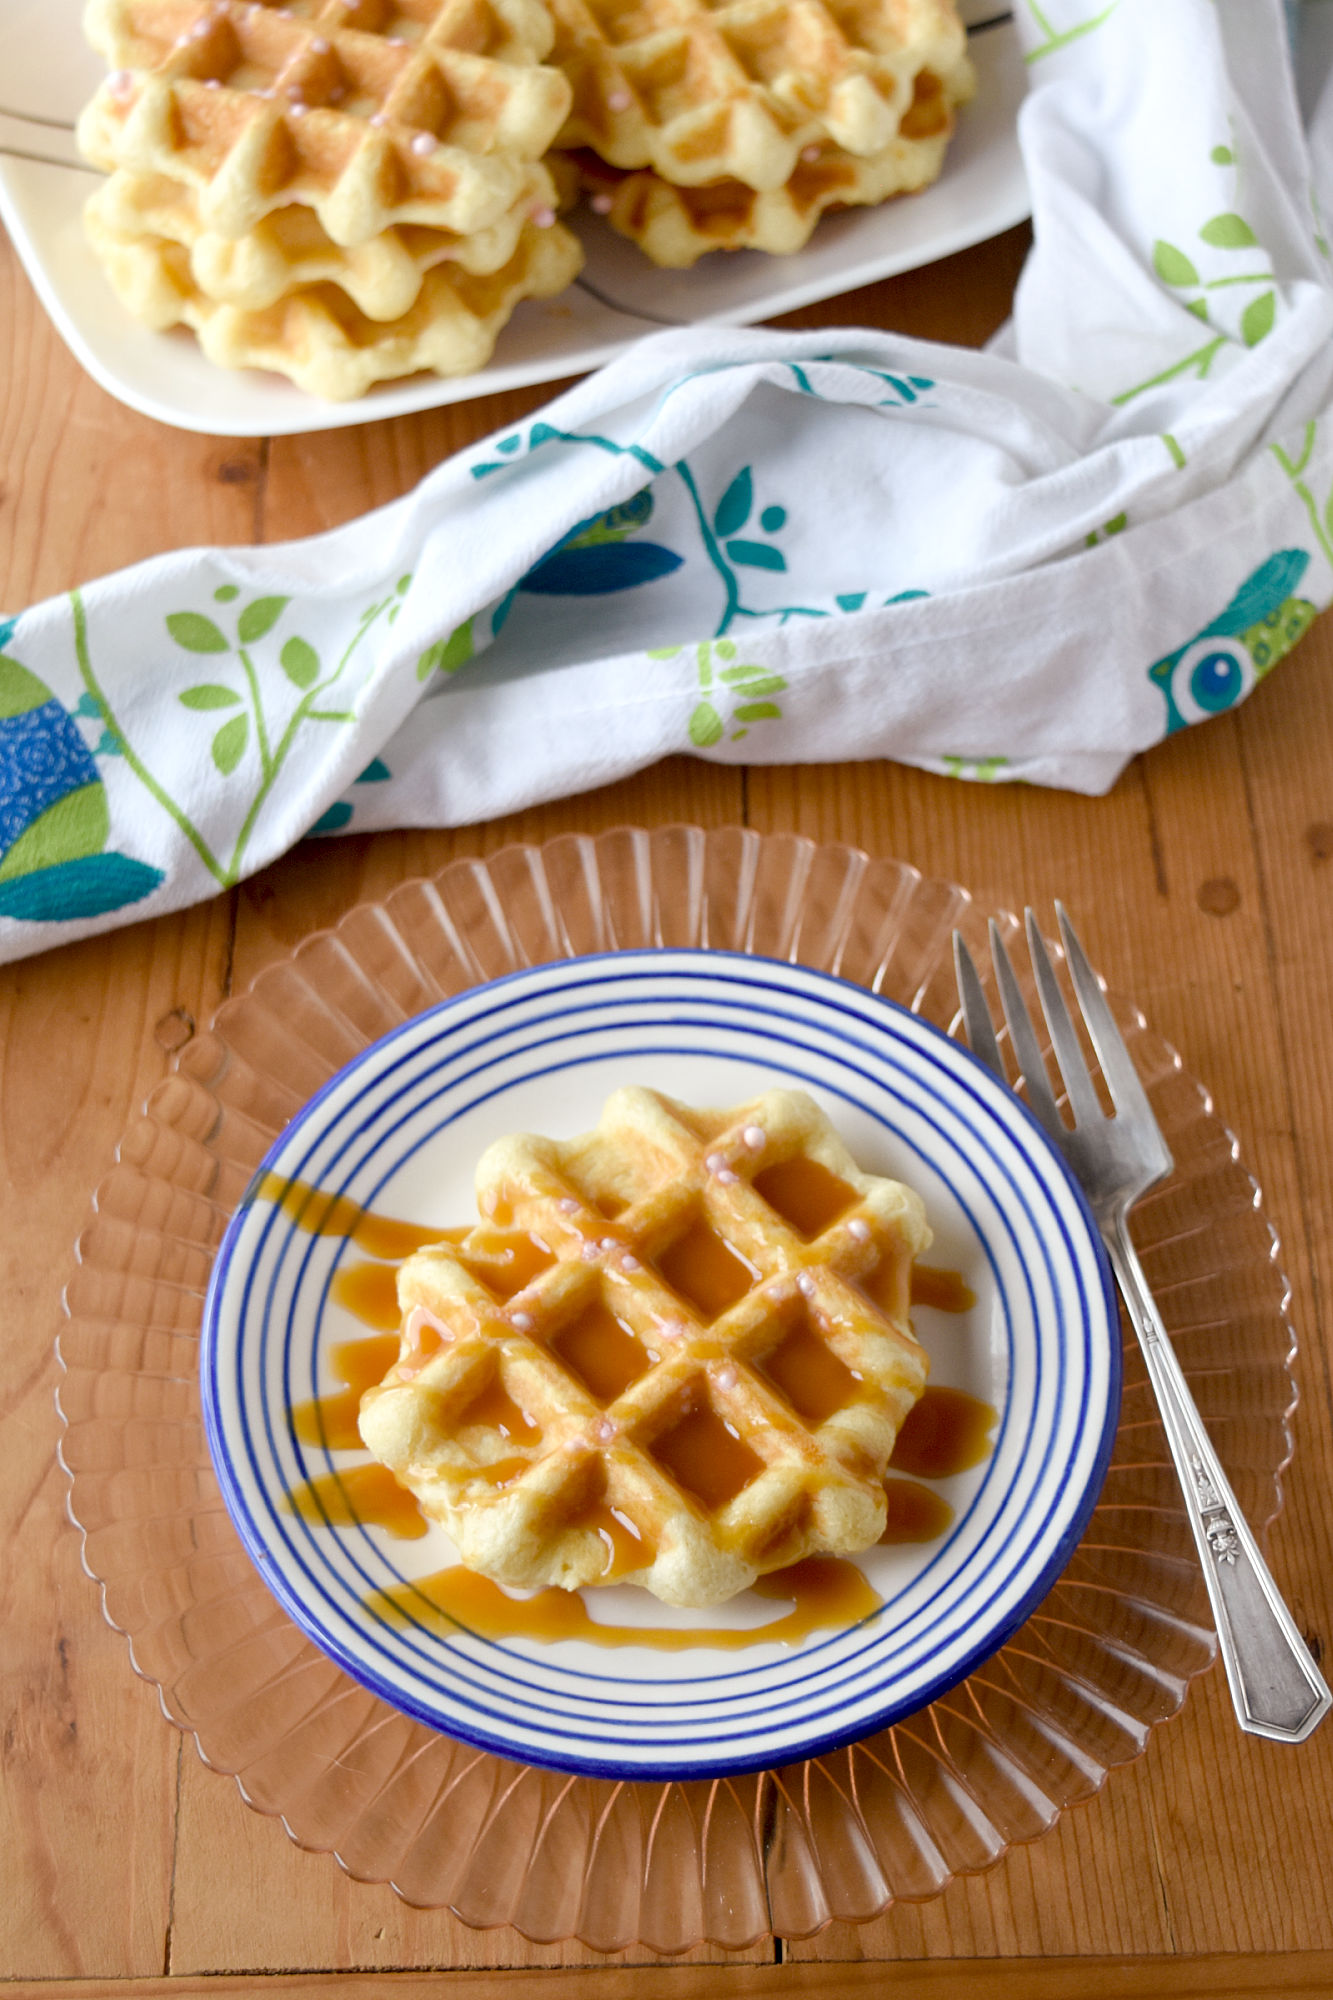 Peach Liège Waffles are a rich, yeast waffle that’s more bread than waffle.  They’re lightly sweet and packed with ripe peaches. #FarmersMarketWeek